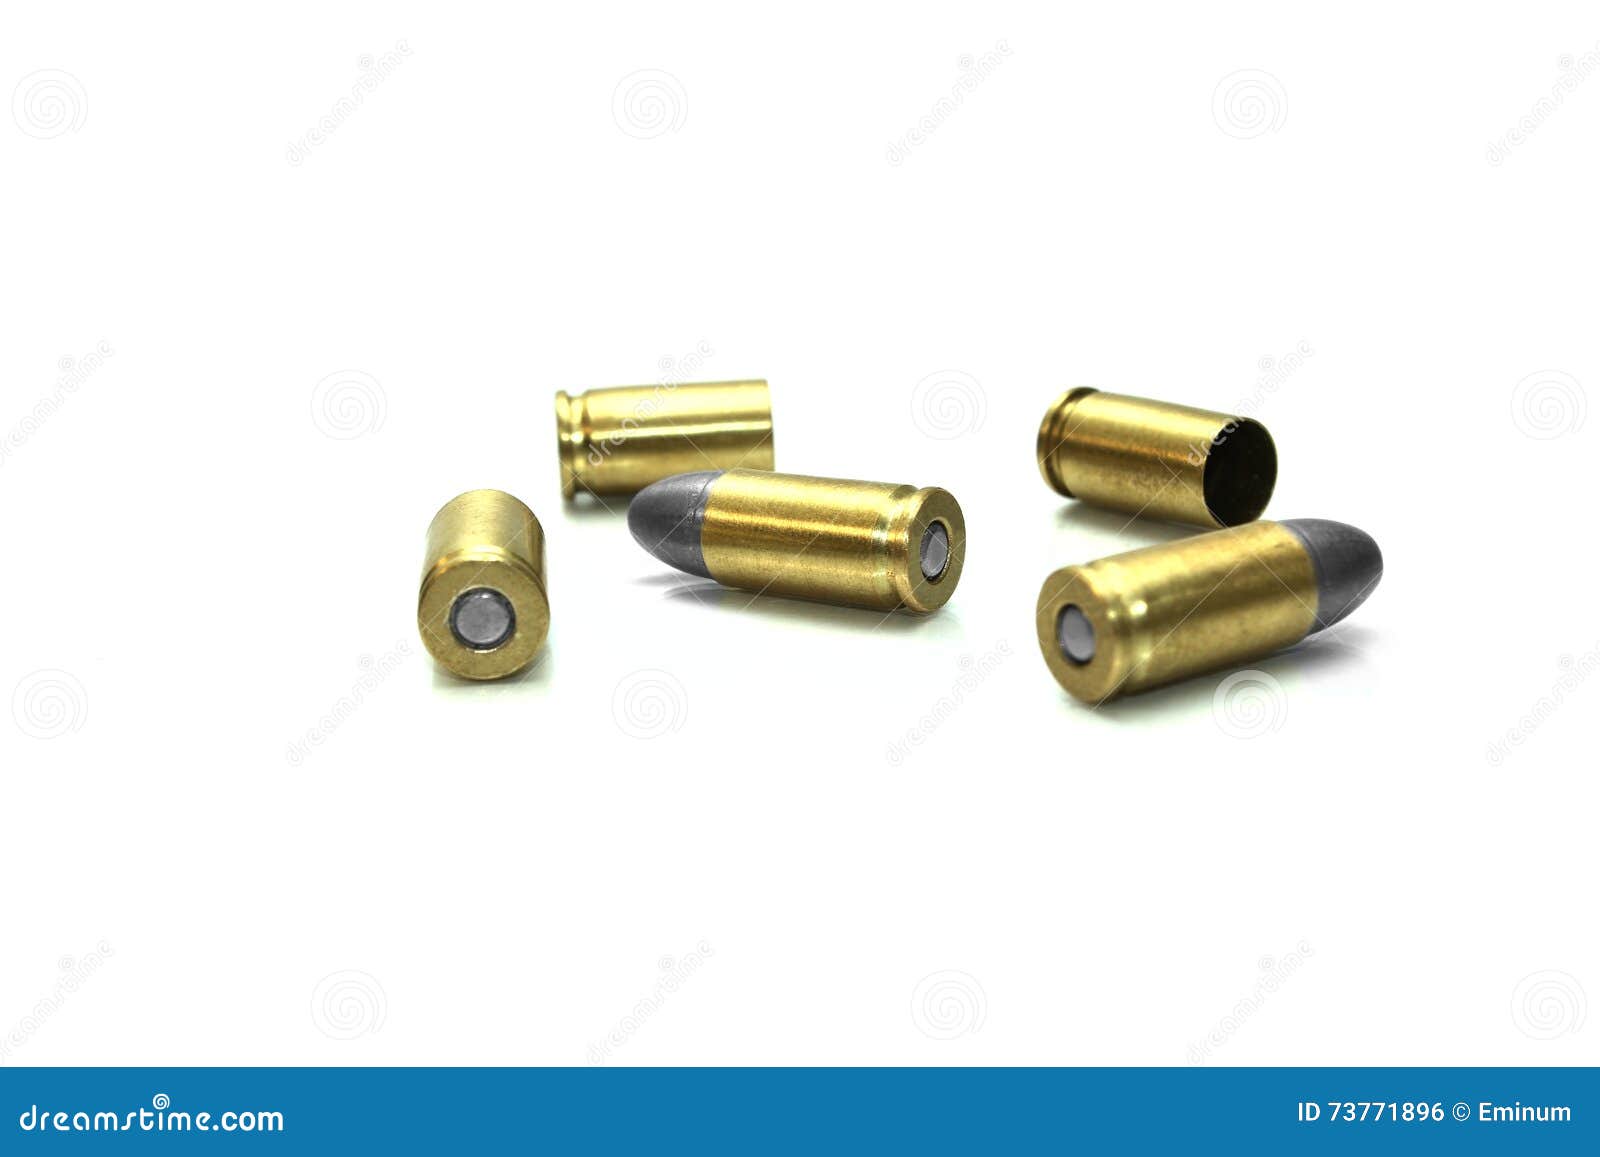 8,379 Bullet Shell Background Stock Photos - Free & Royalty-Free